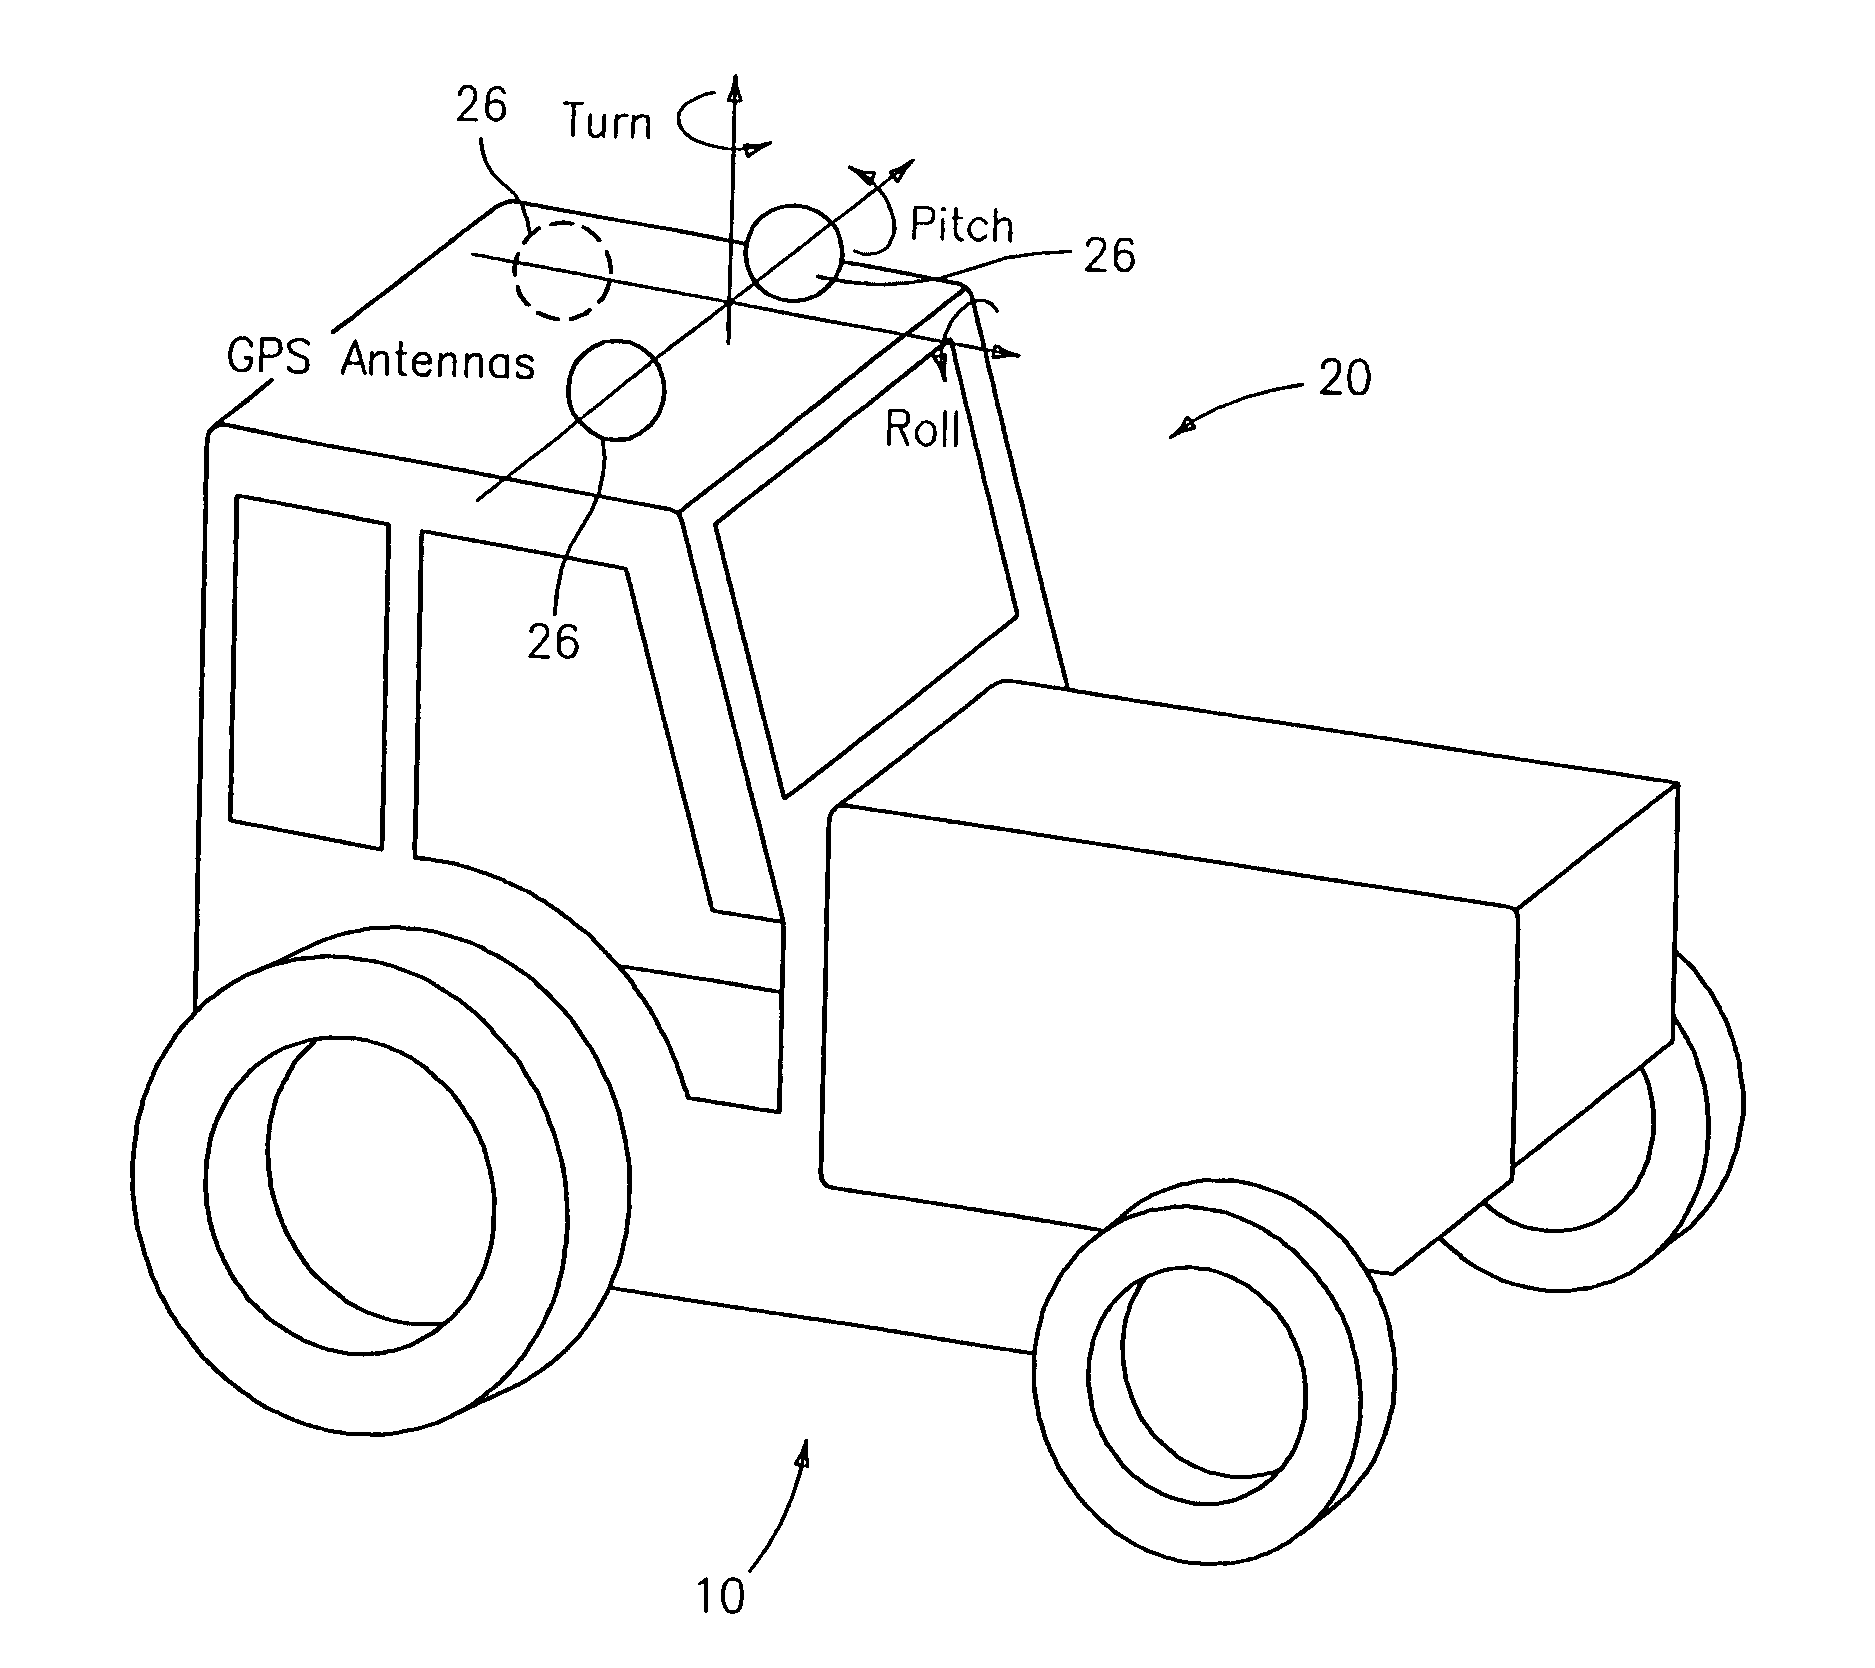 Satellite position and heading sensor for vehicle steering control